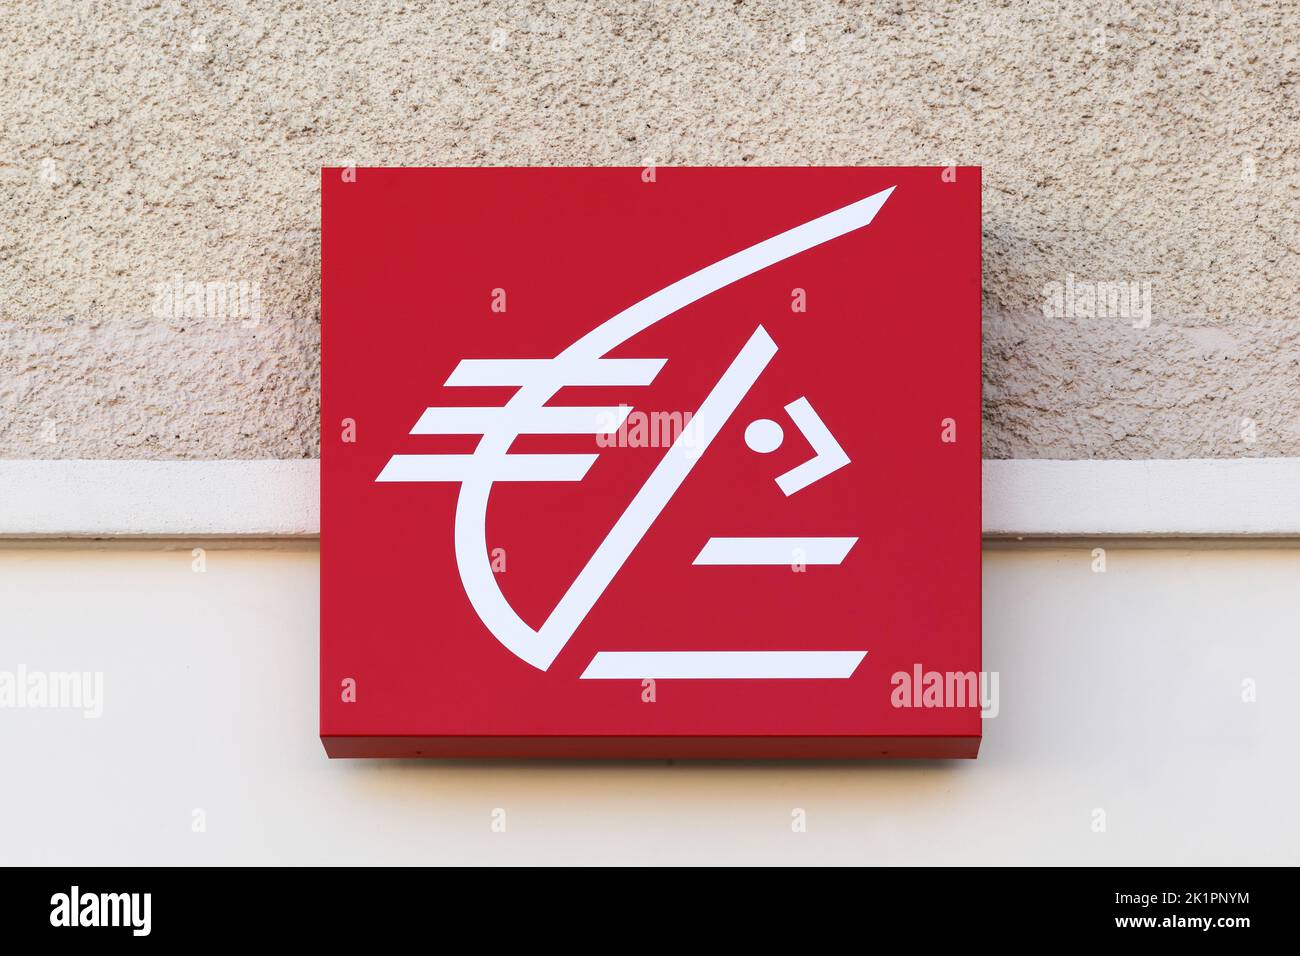 Villefranche, France - March 8, 2020: Caisse d'epargne logo on a wall. Caisse d'epargne is a French semi cooperative banking group Stock Photo